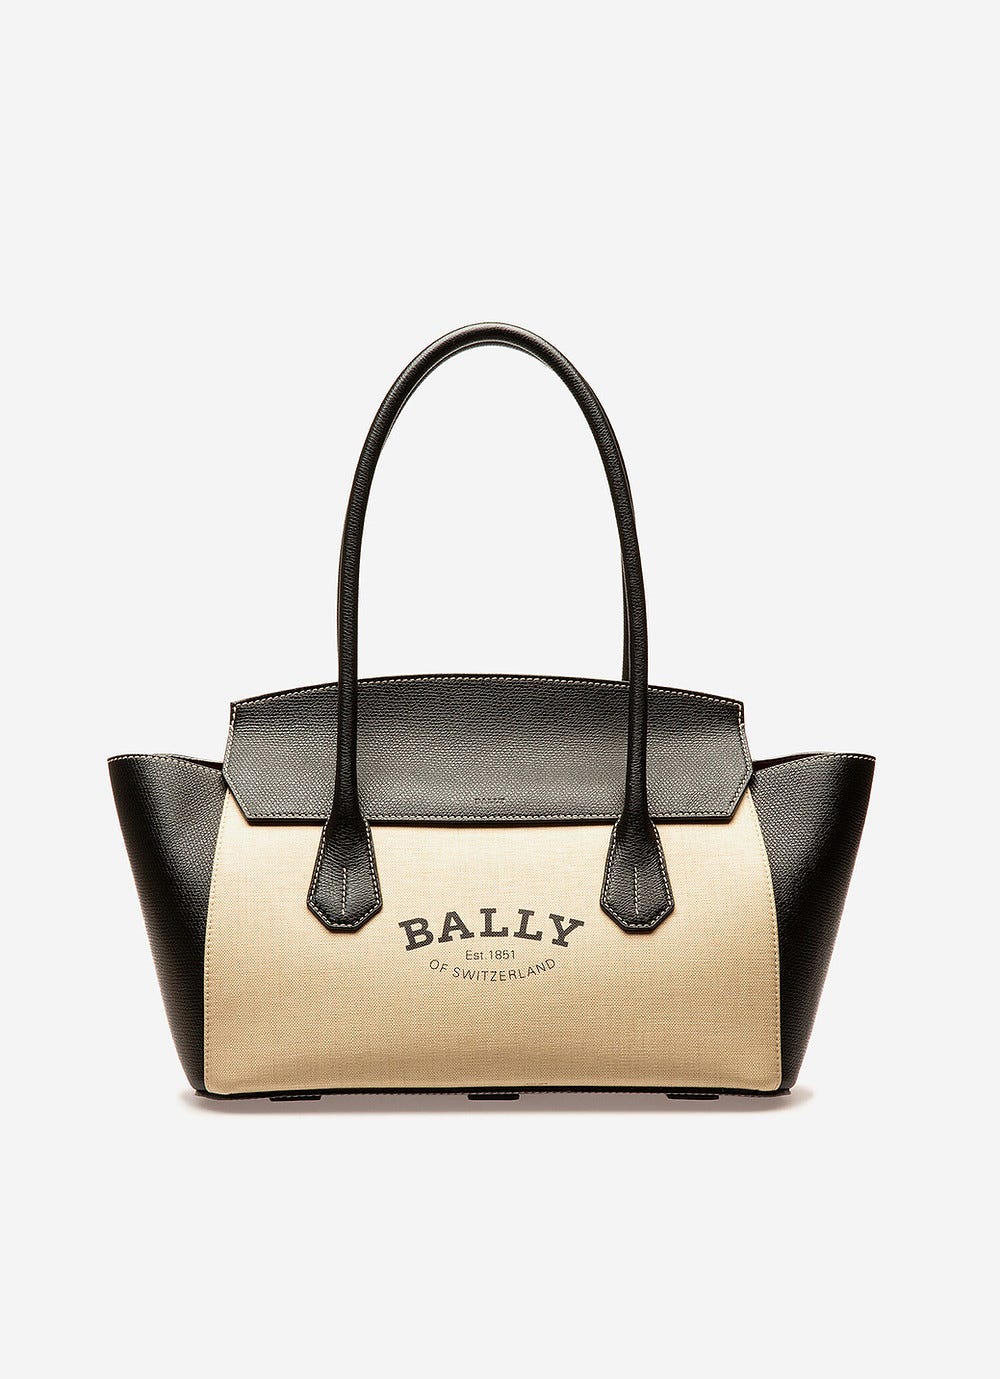 4 Reasons You Should Buy Bally Bags, by I LUVE IT